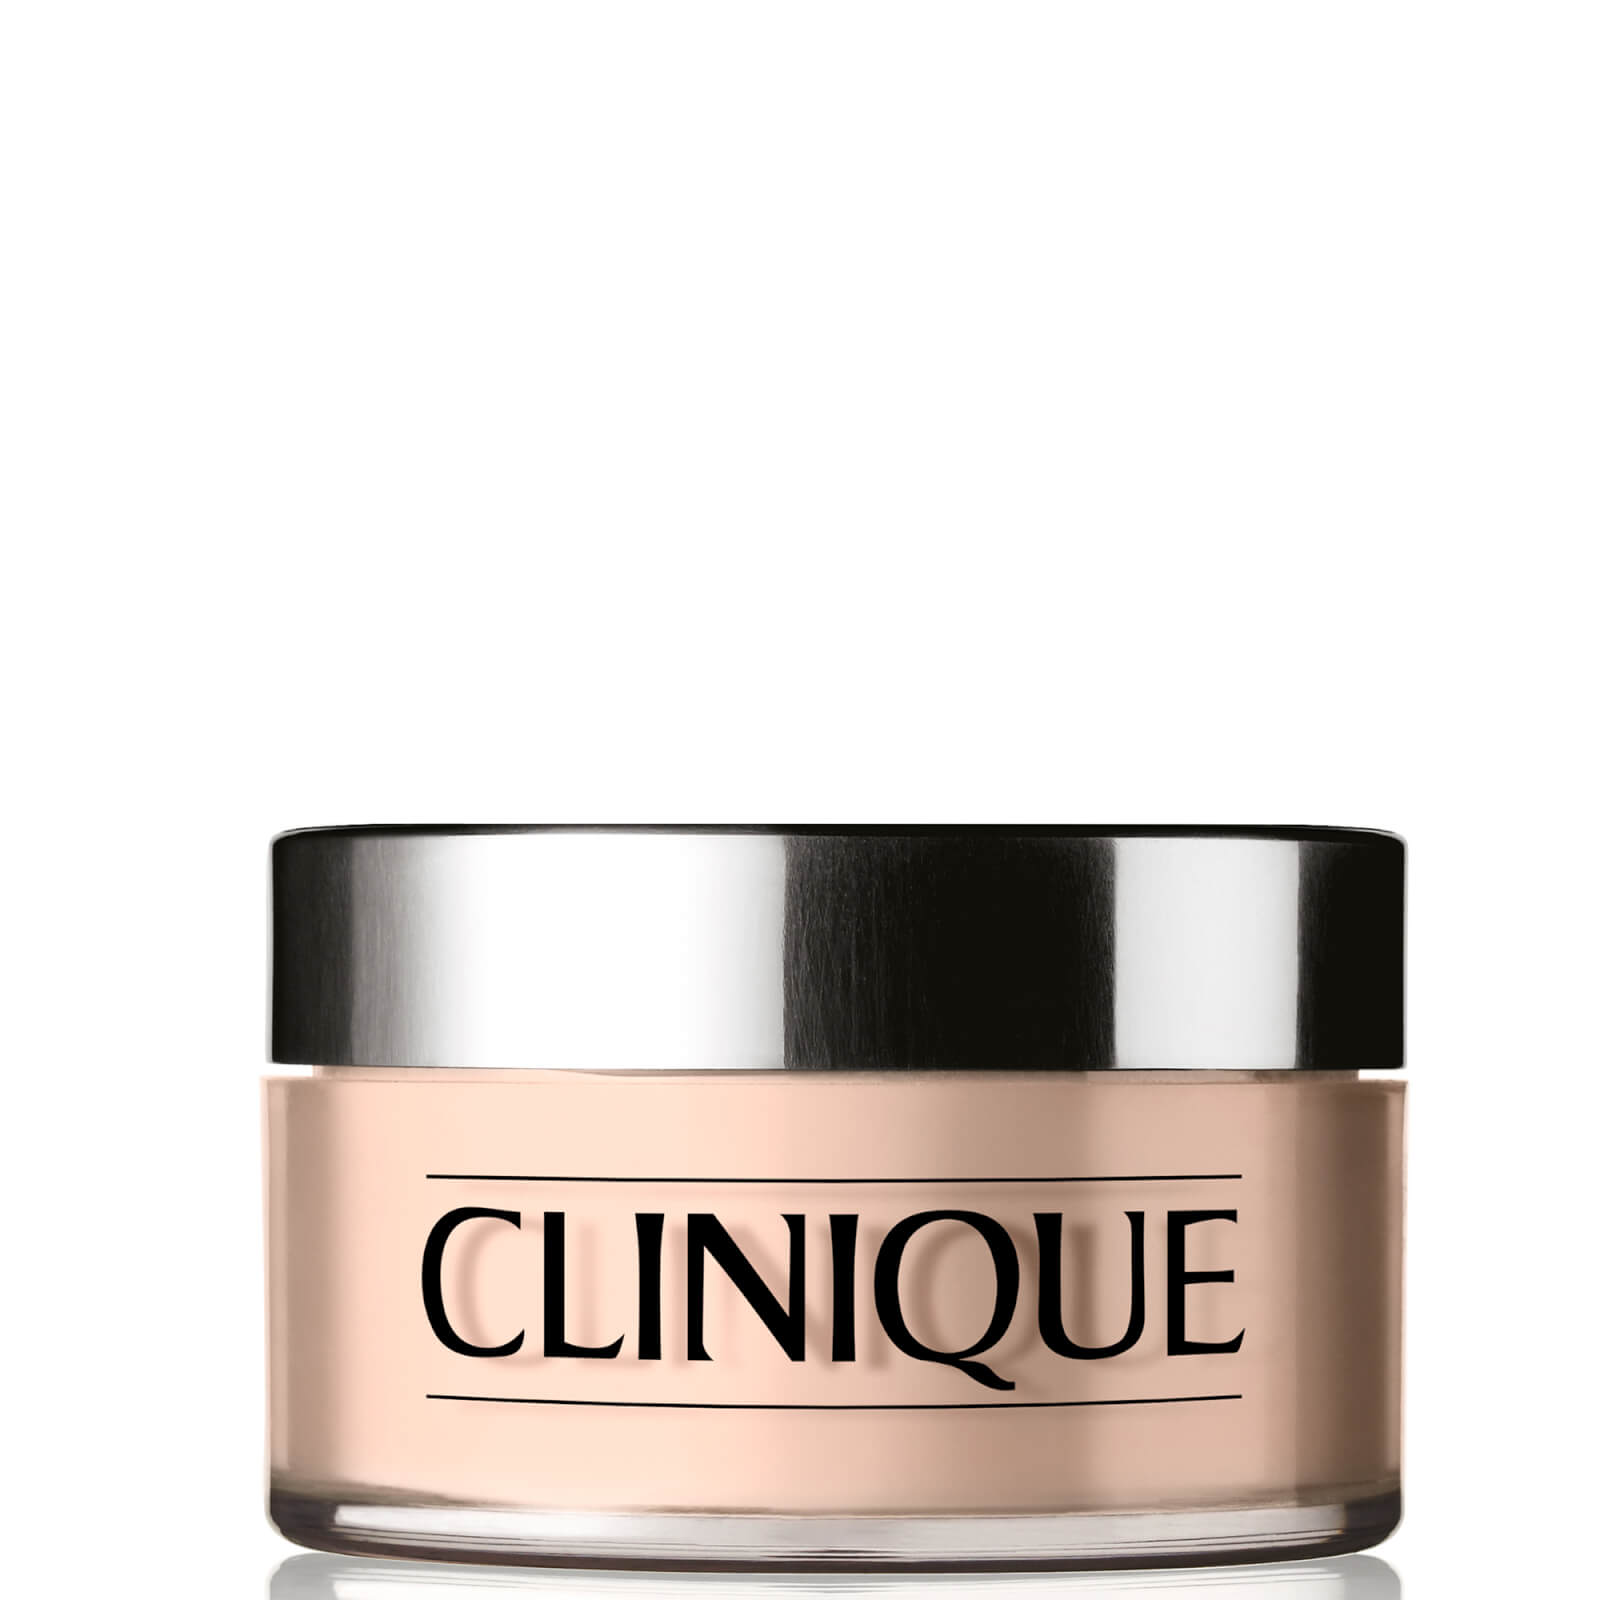 Clinique Blended Face Powder 25g (Various Shades) - 3